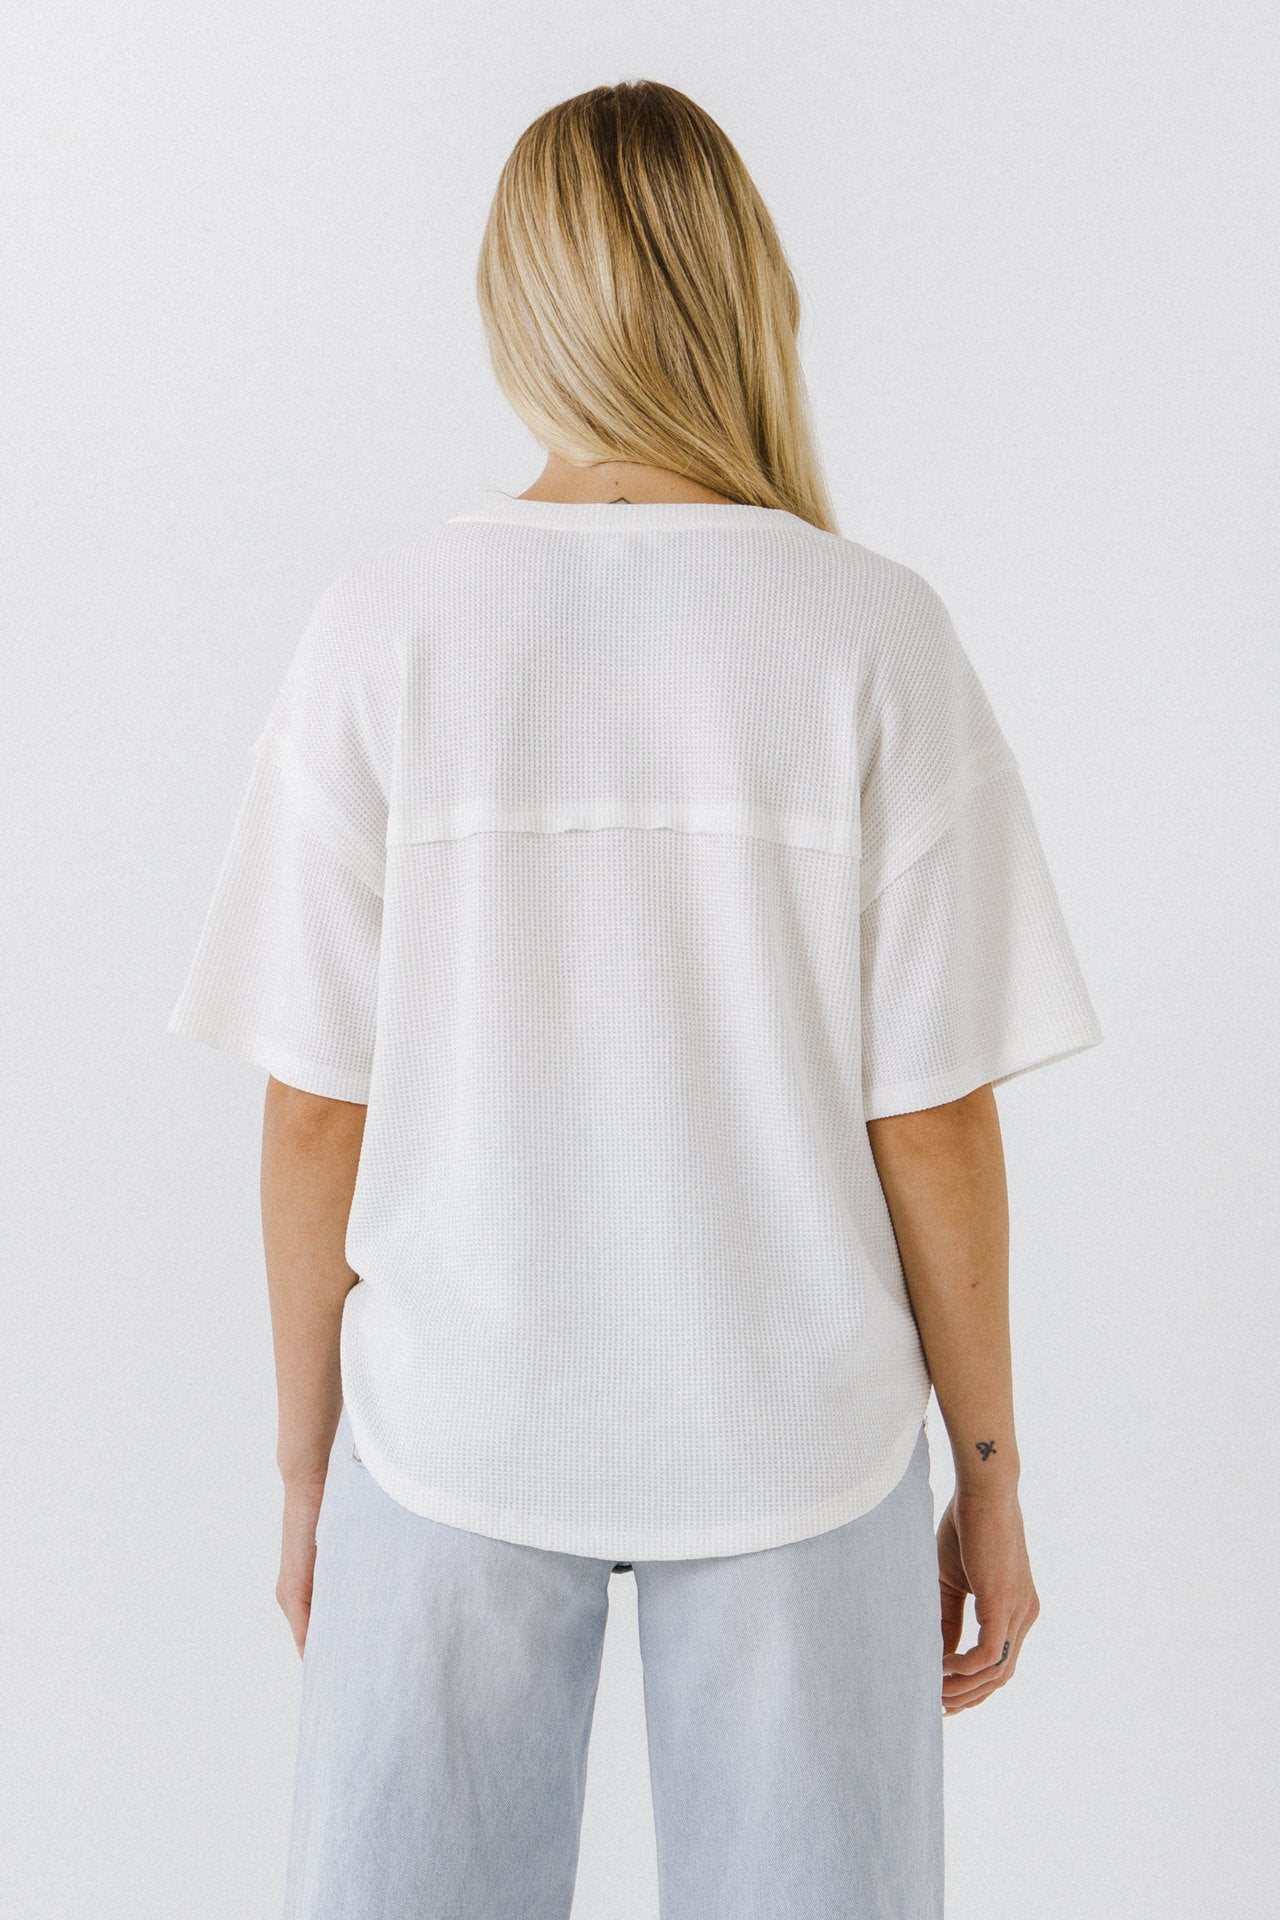 FREE THE ROSES - Thermal Knit Top - TOPS available at Objectrare